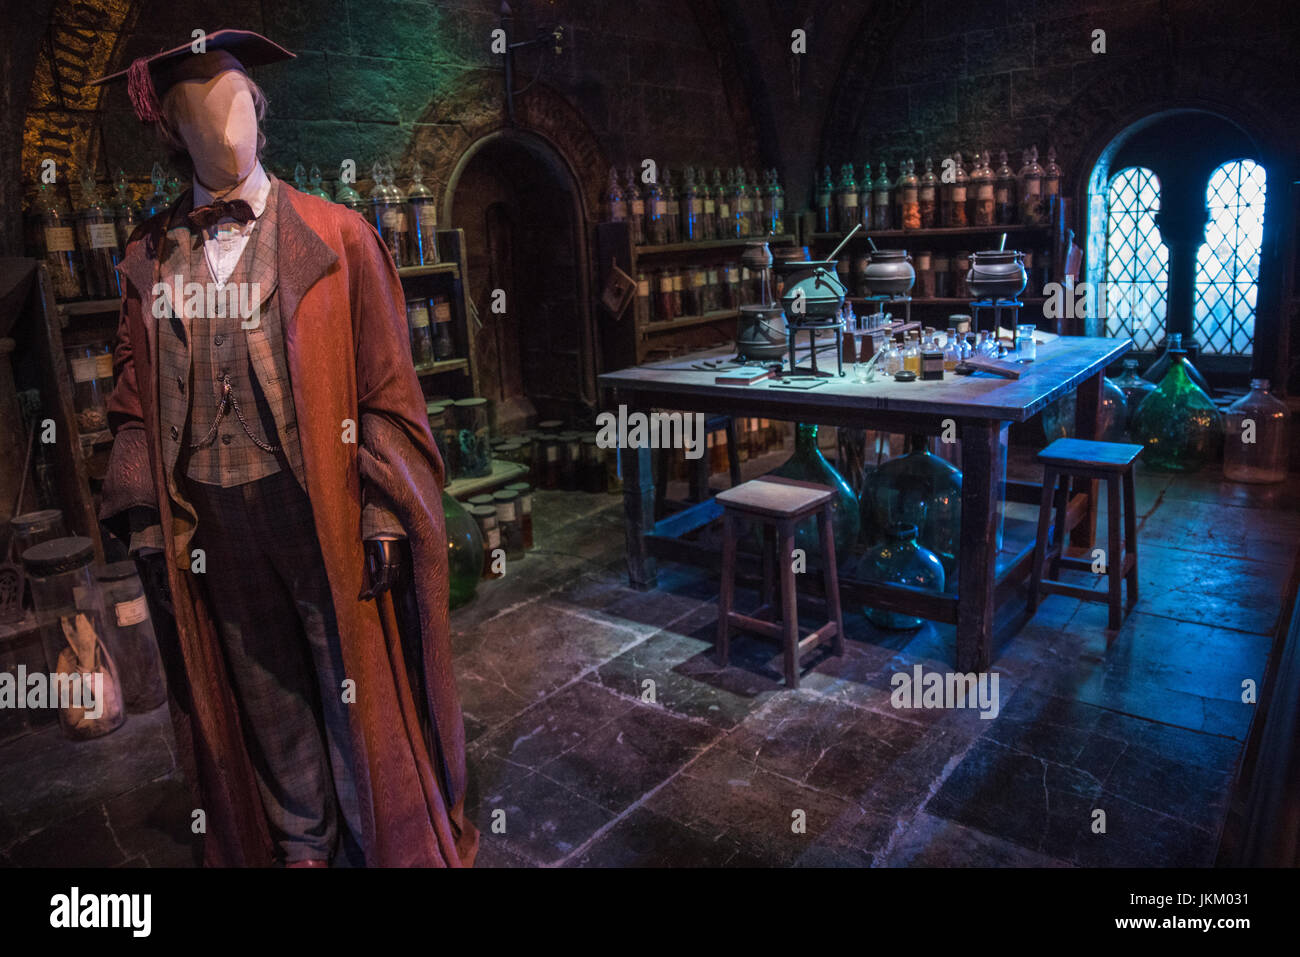 The Making of Harry Potter 29-05-2012, Potions Classroom Hi…